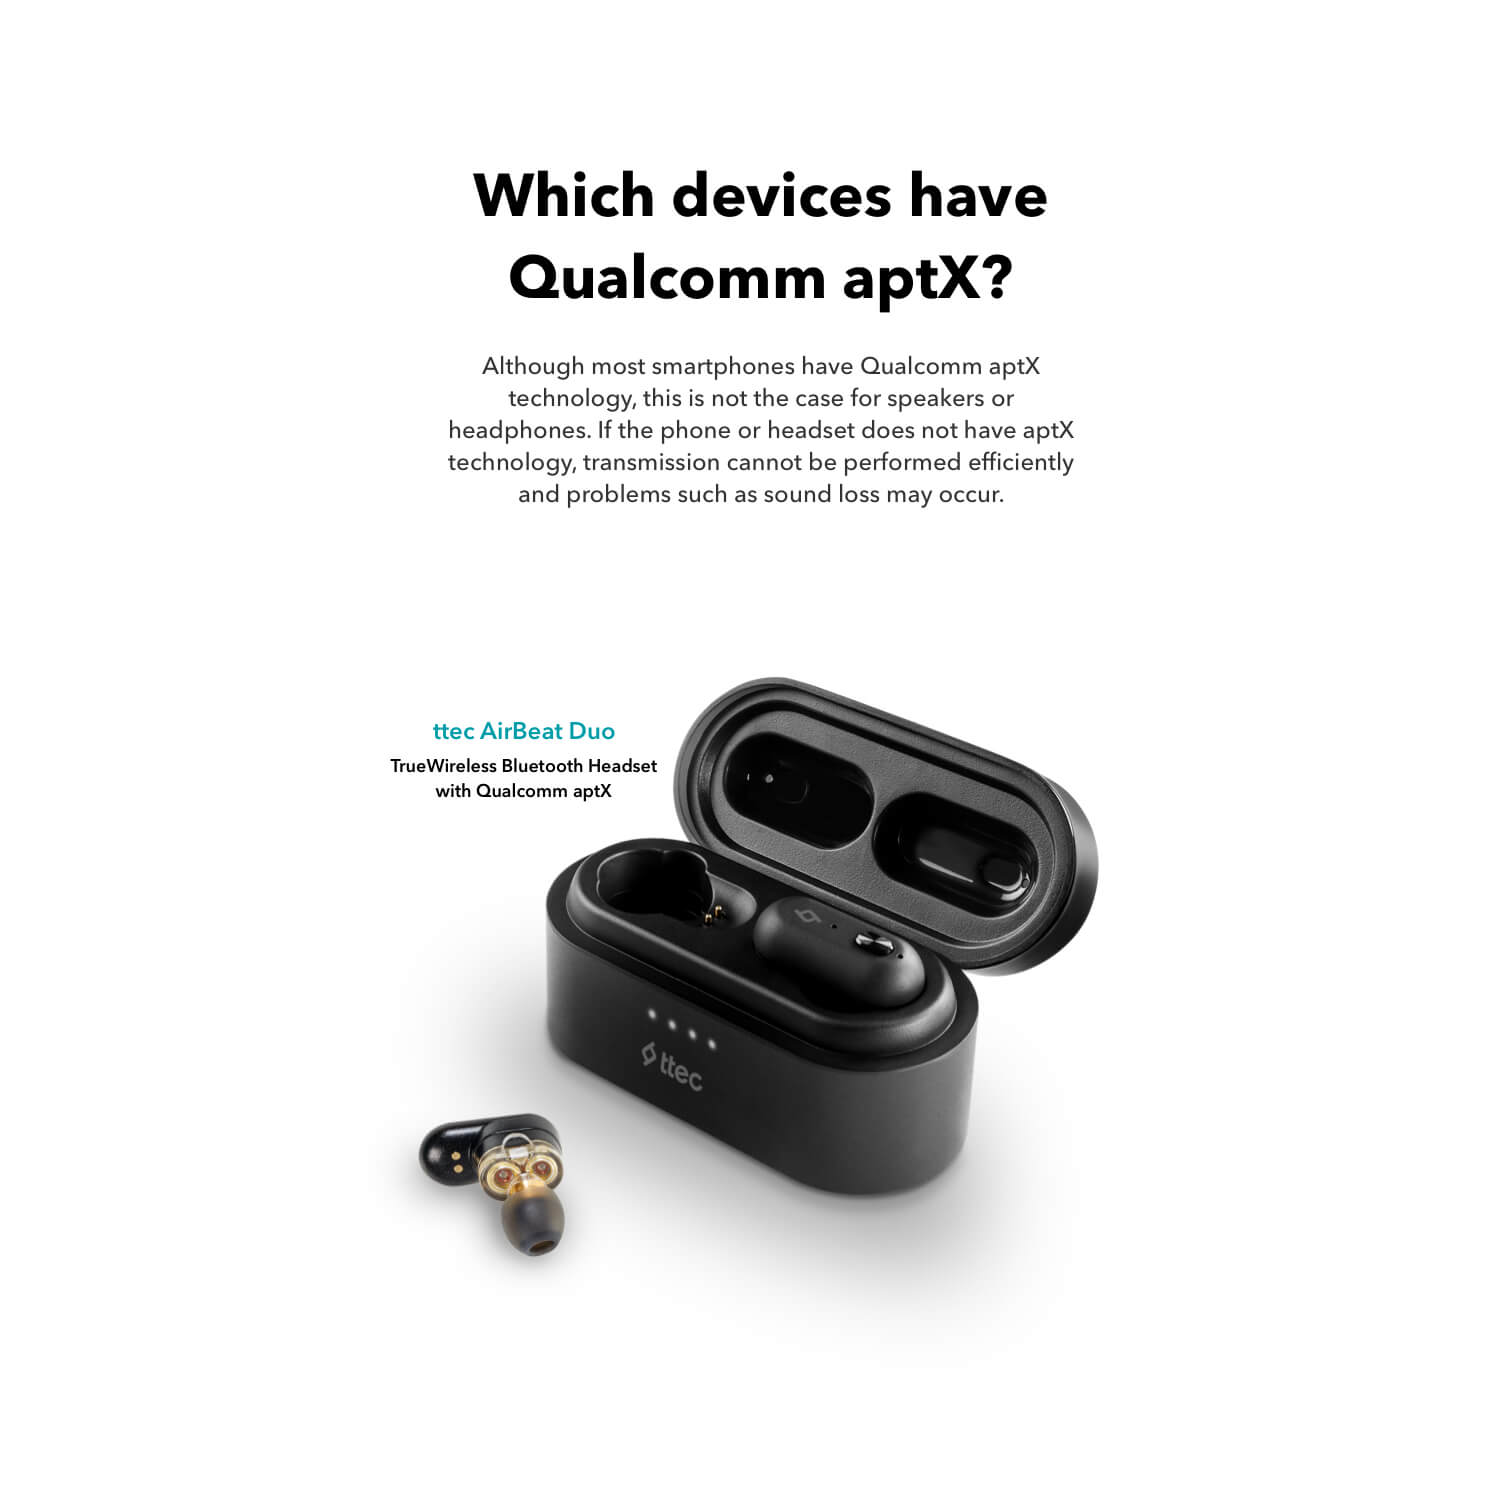 Which devices have Qualcomm aptx